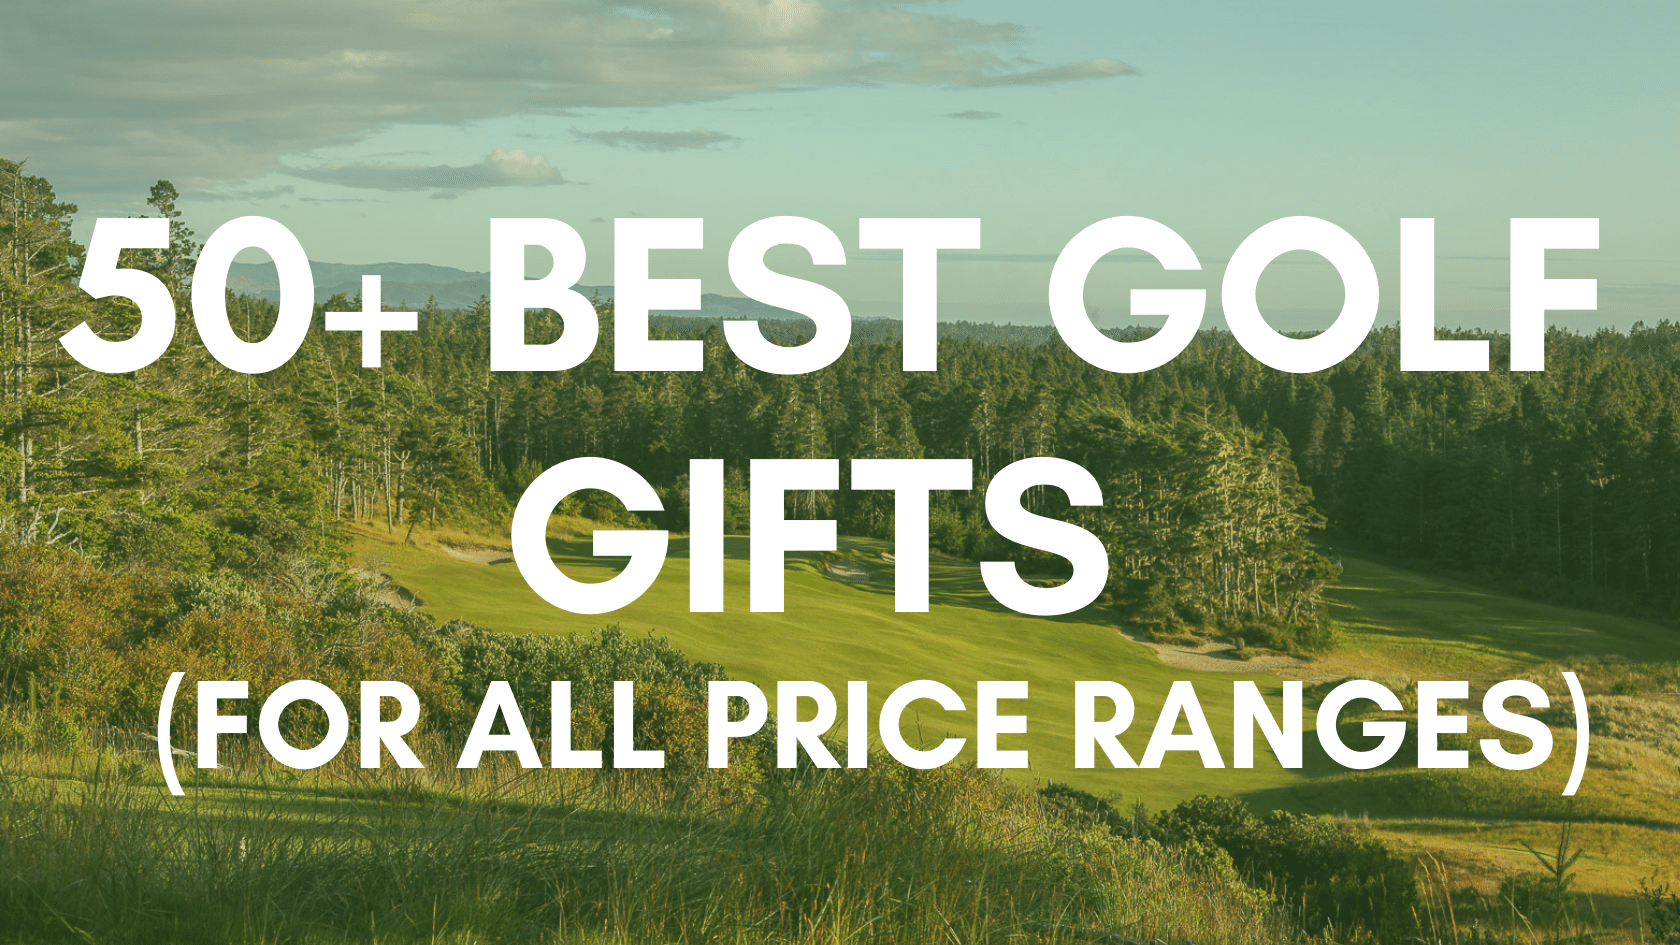 Luxury Golf Gift Set for men - Gifts for all golfers